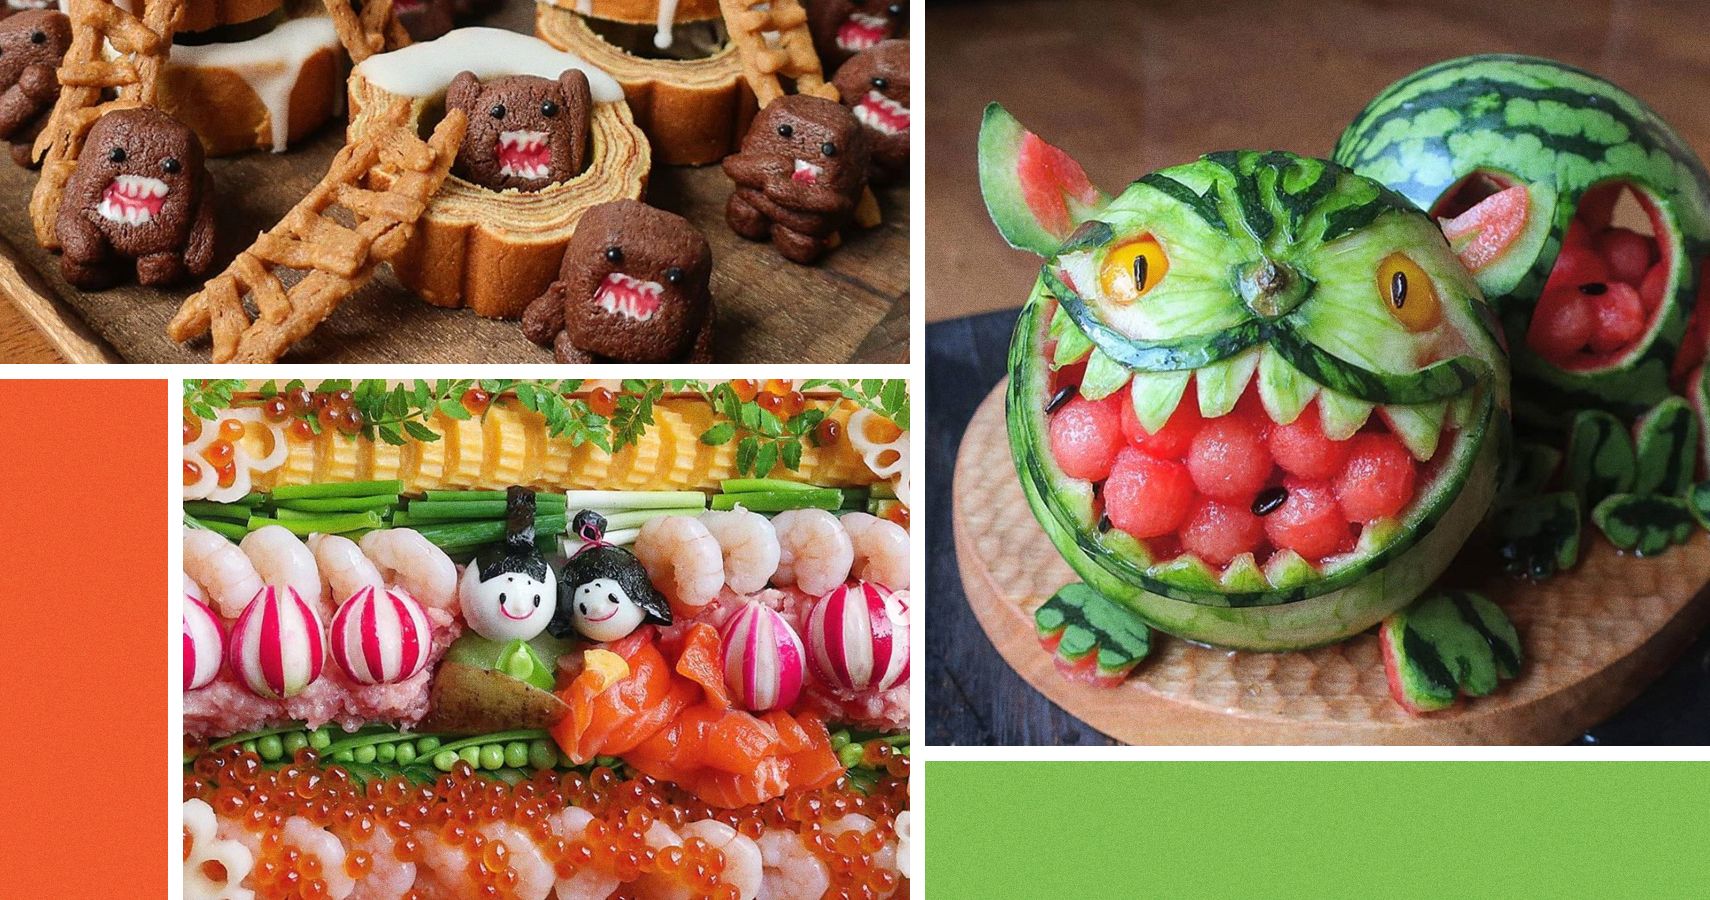 Mom Makes Amazing Works Of Art With Food